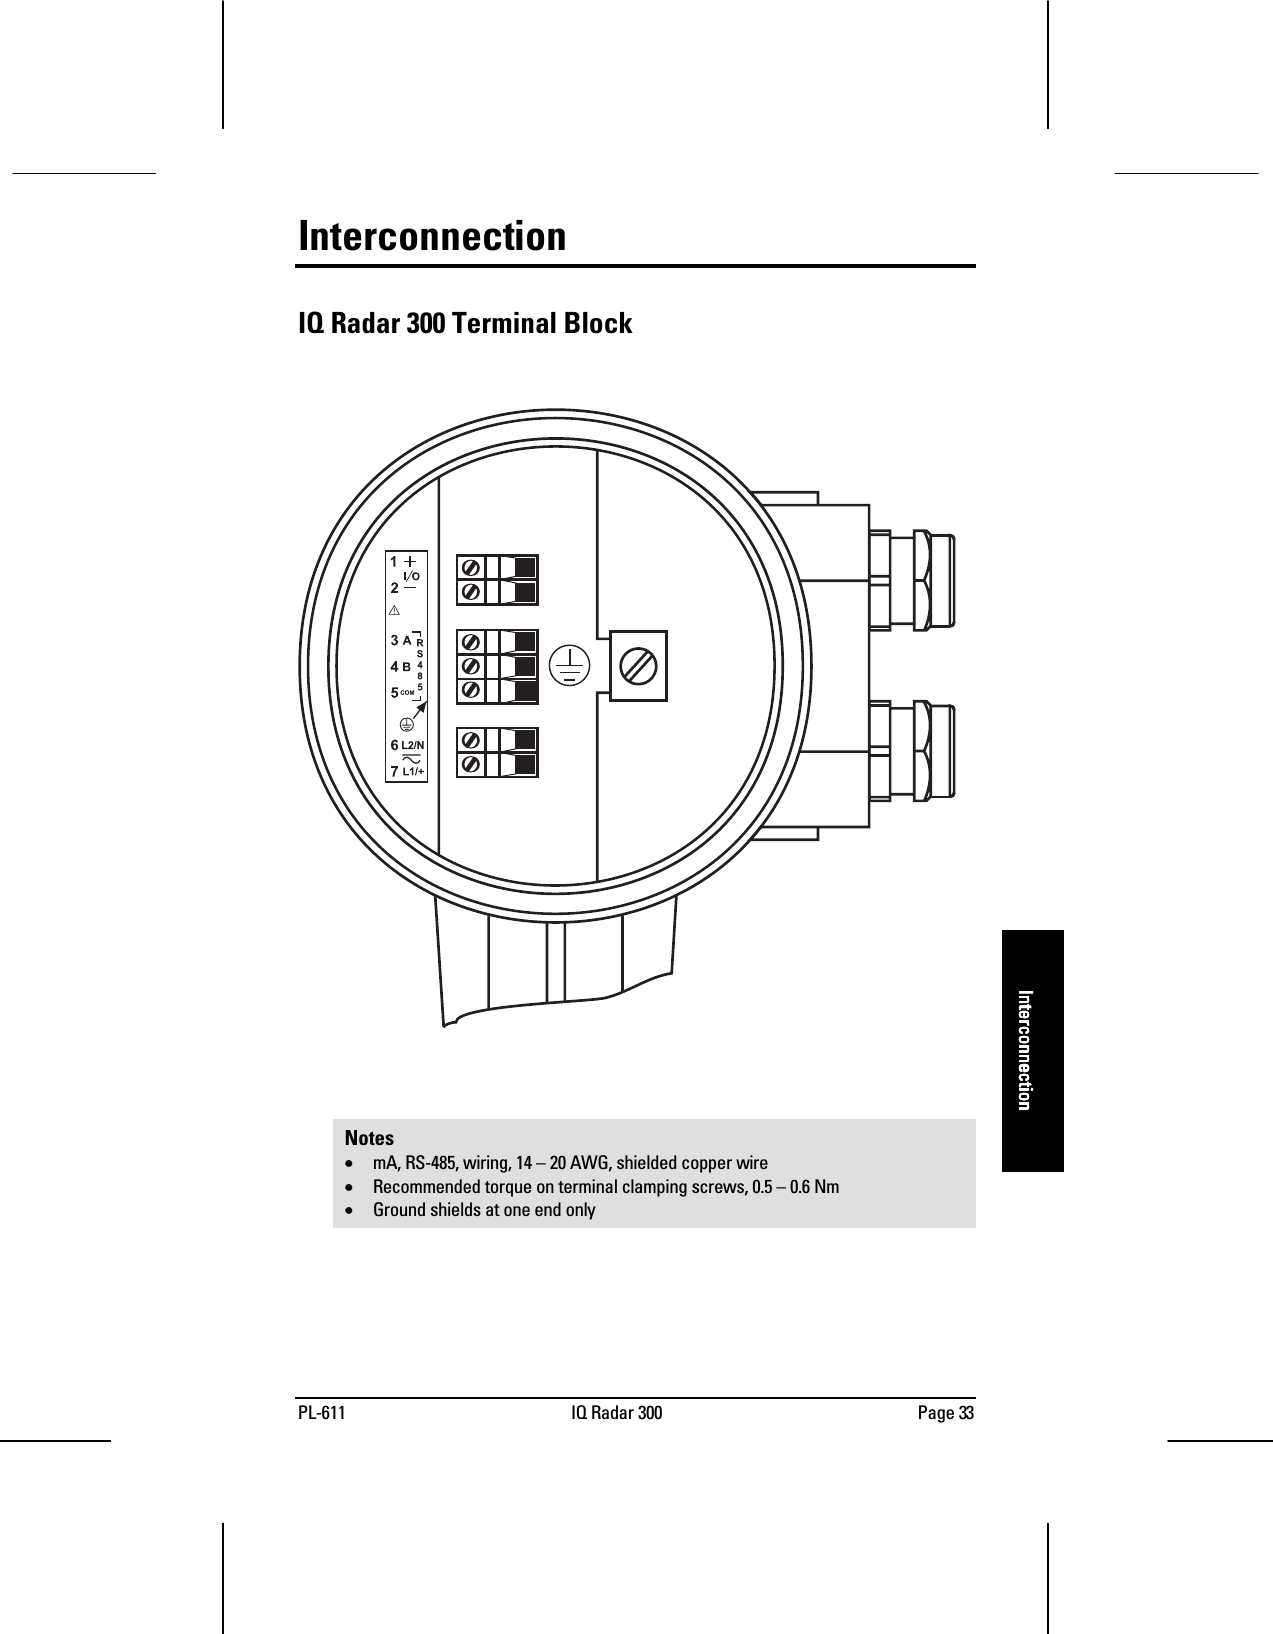 PL-611 IQ Radar 300 Page 33InterconnectionInterconnectionInterconnectionInterconnectionInterconnectionIQ Radar 300 Terminal BlockNotes• mA, RS-485, wiring, 14 – 20 AWG, shielded copper wire• Recommended torque on terminal clamping screws, 0.5 – 0.6 Nm• Ground shields at one end only